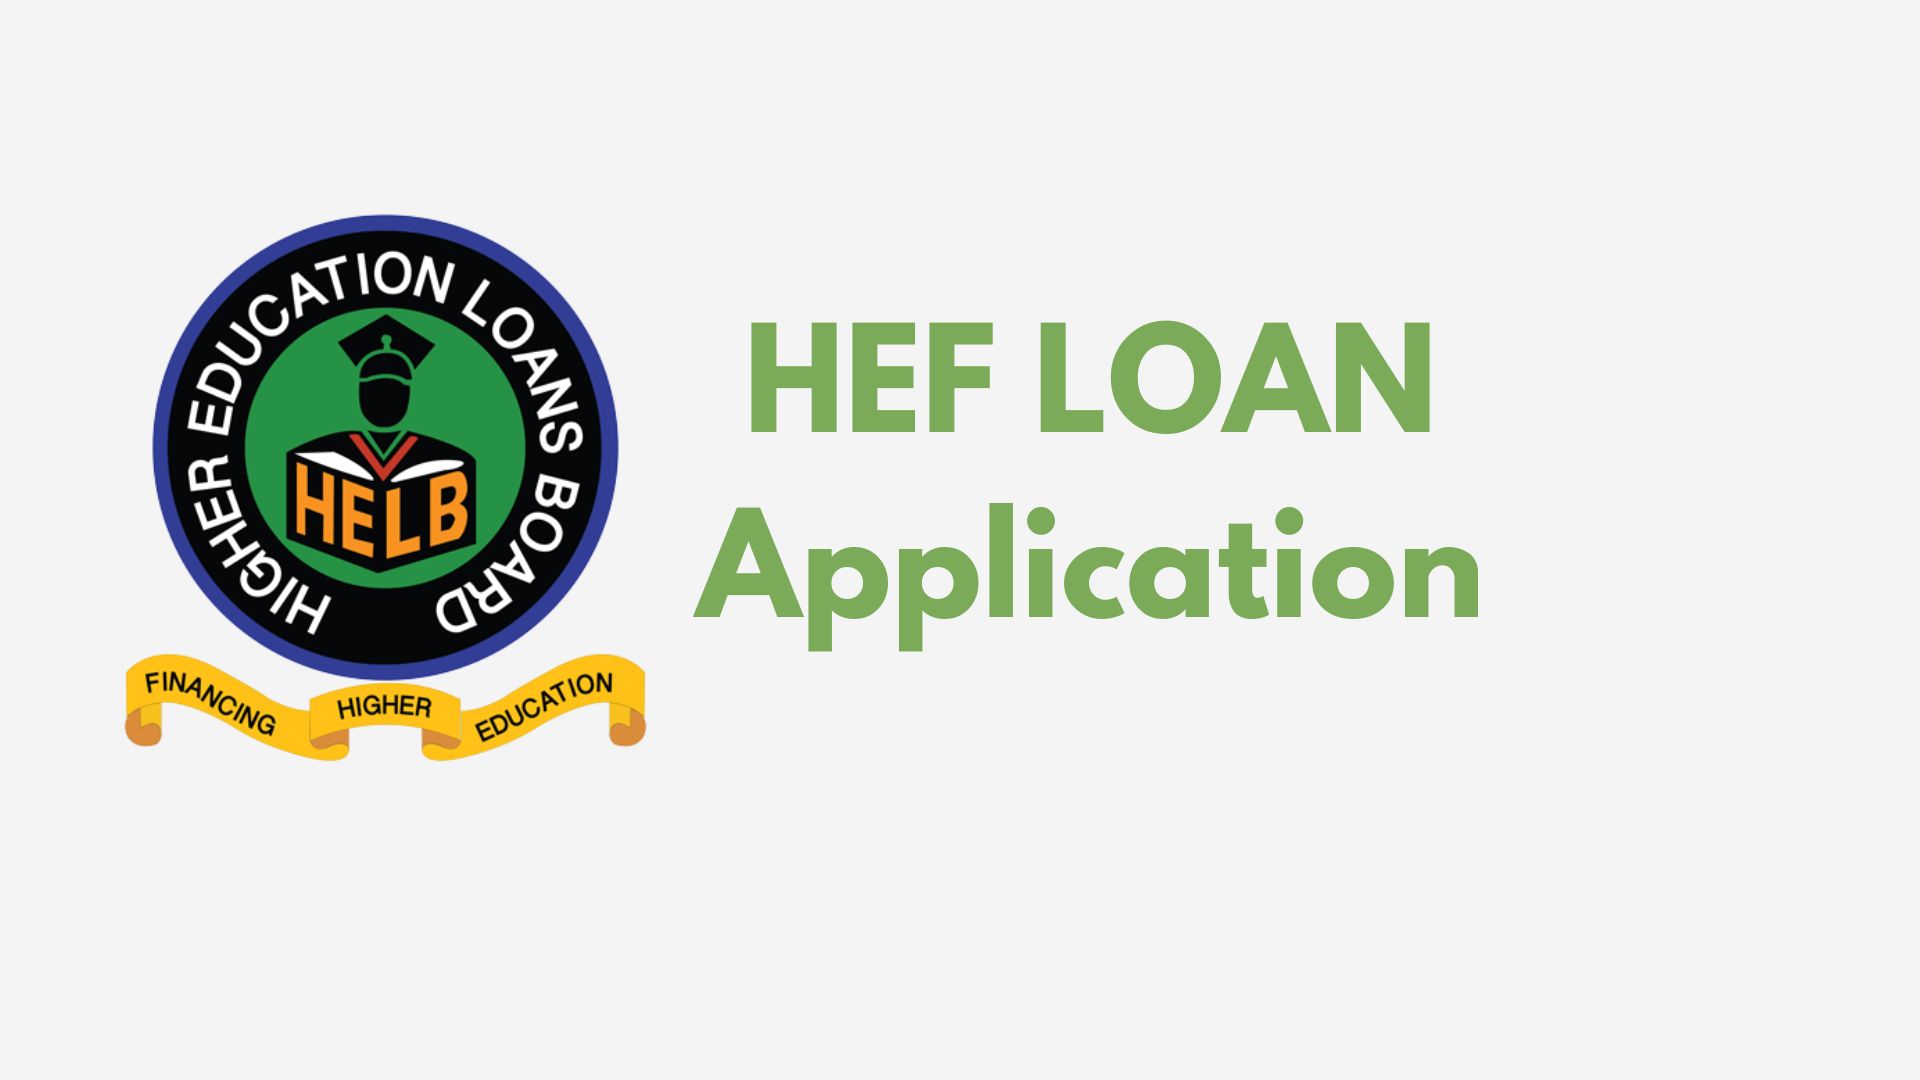 Who can apply for HEF Loan and Scholarship (explained)